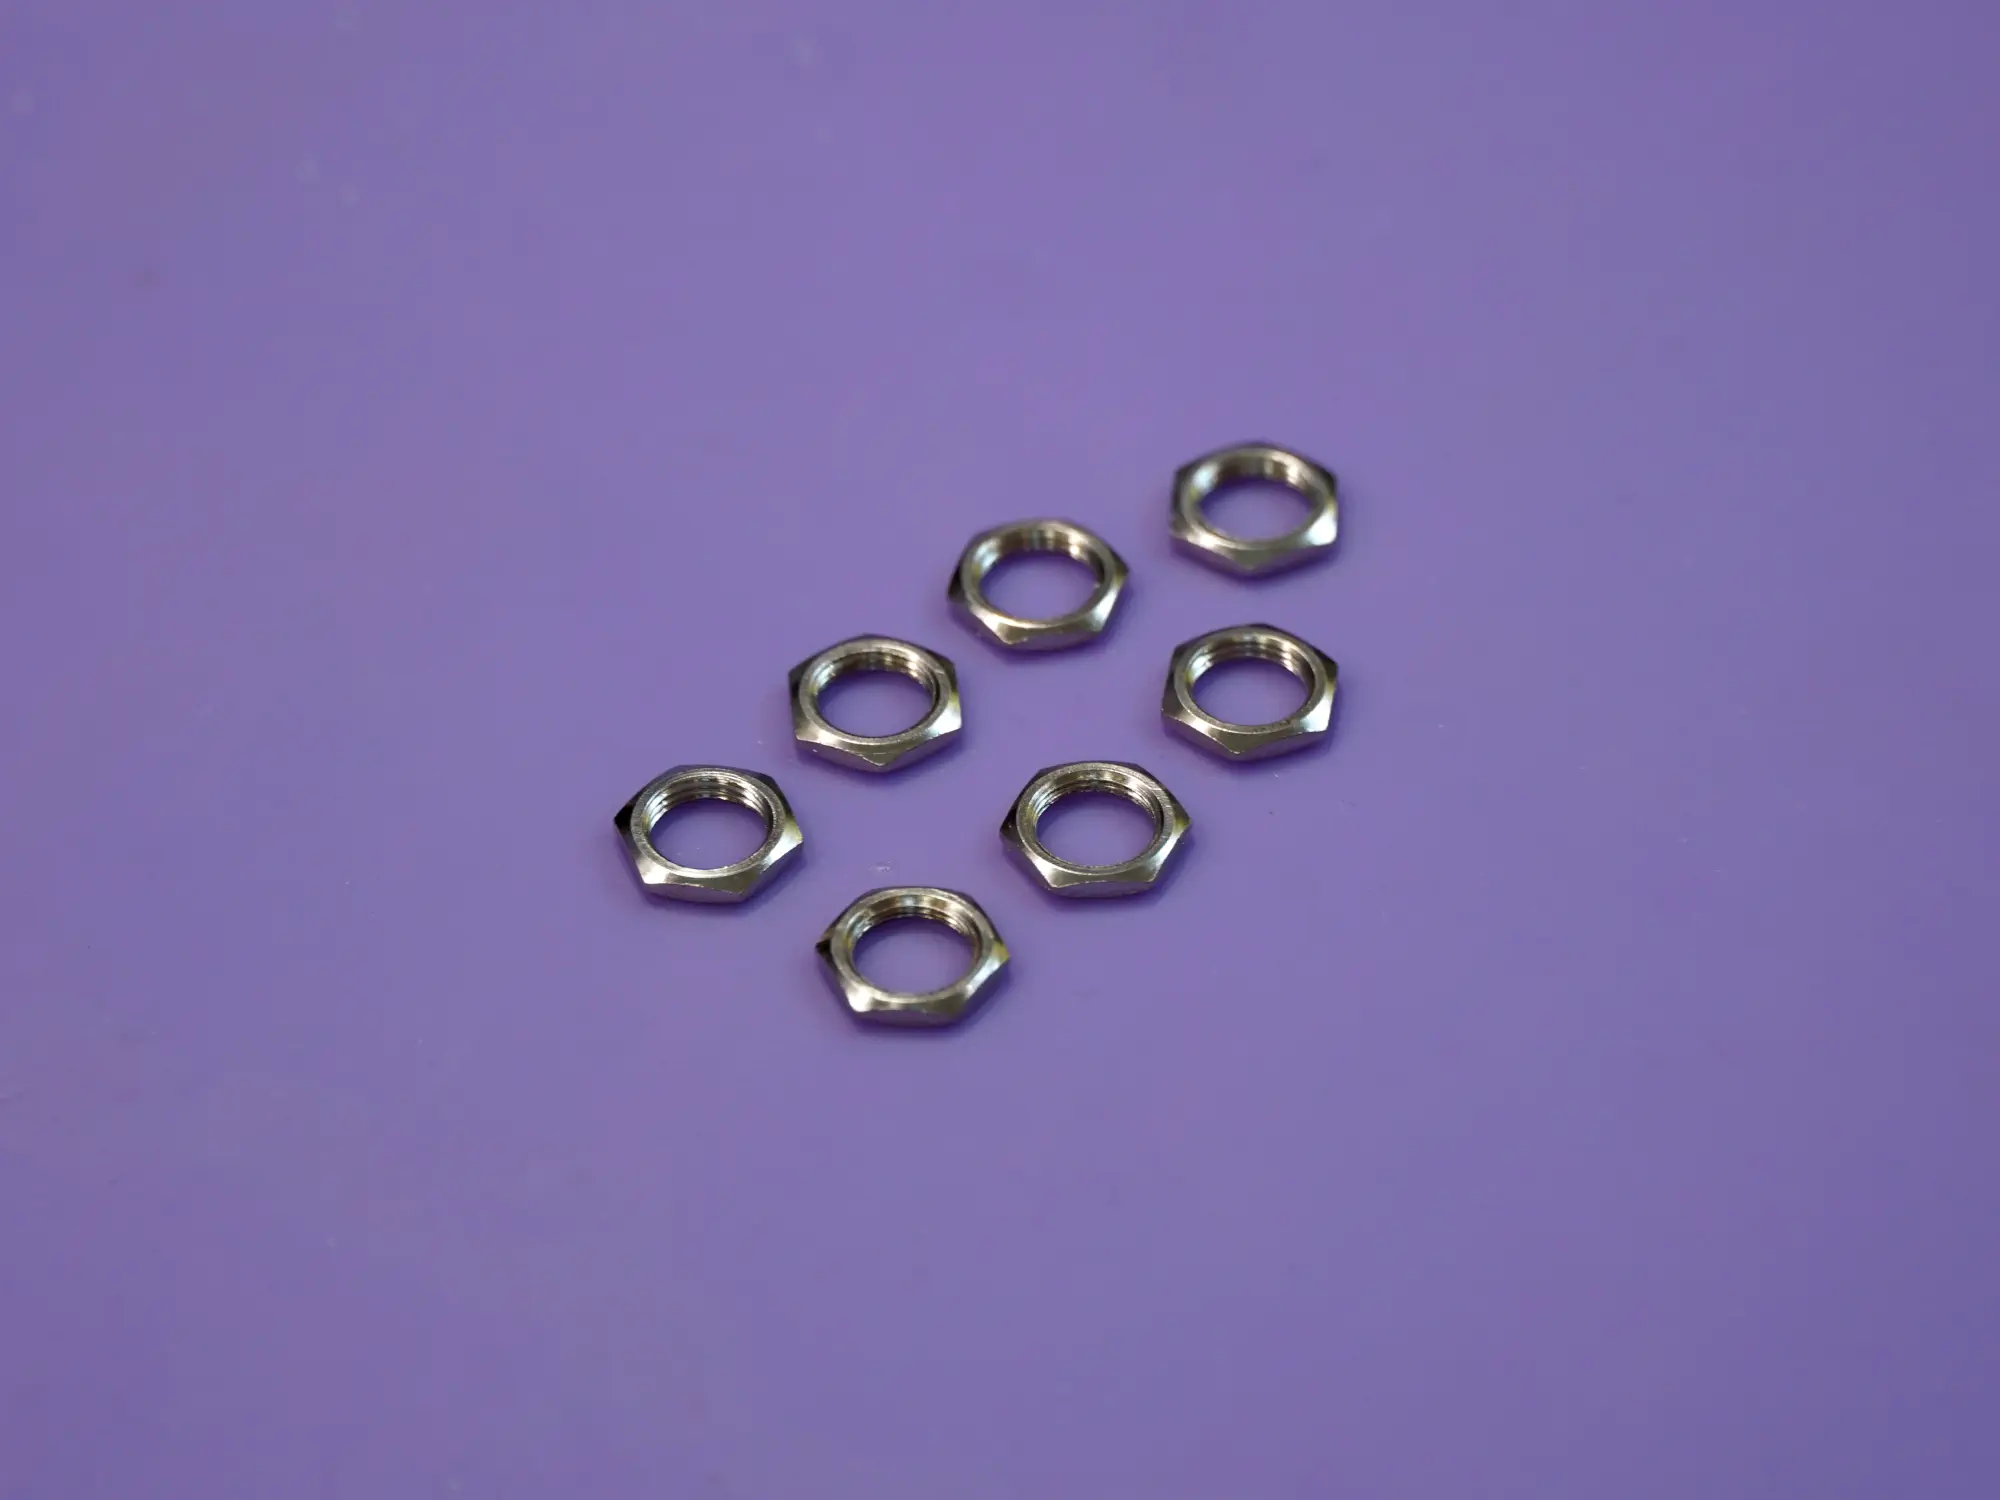 Hex nuts for 1/8" jacks